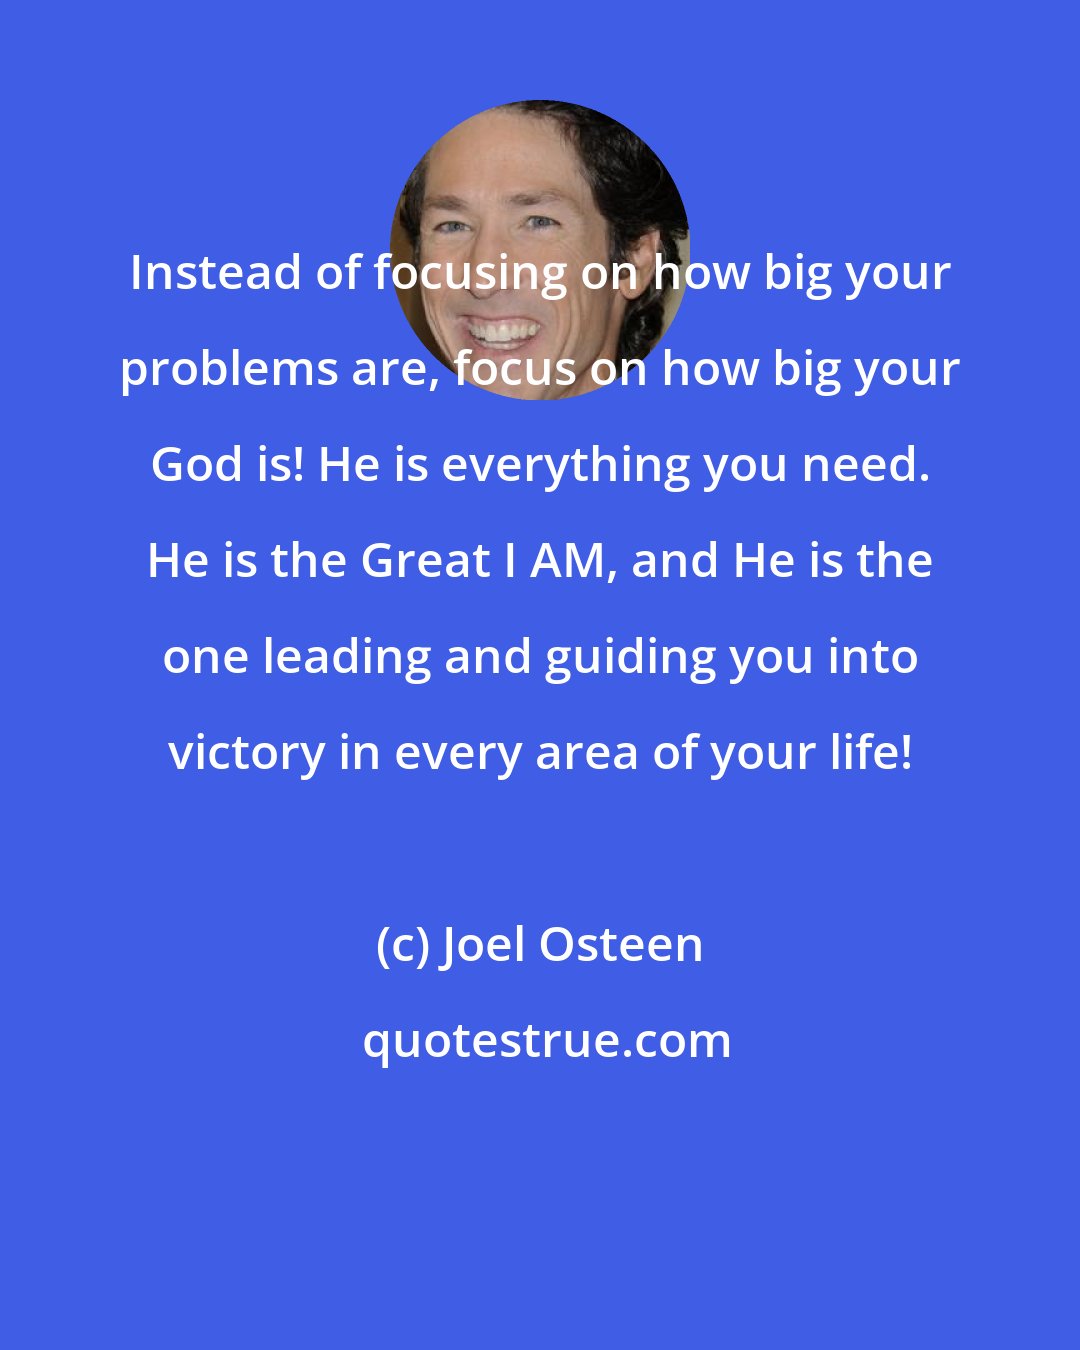 Joel Osteen: Instead of focusing on how big your problems are, focus on how big your God is! He is everything you need. He is the Great I AM, and He is the one leading and guiding you into victory in every area of your life!